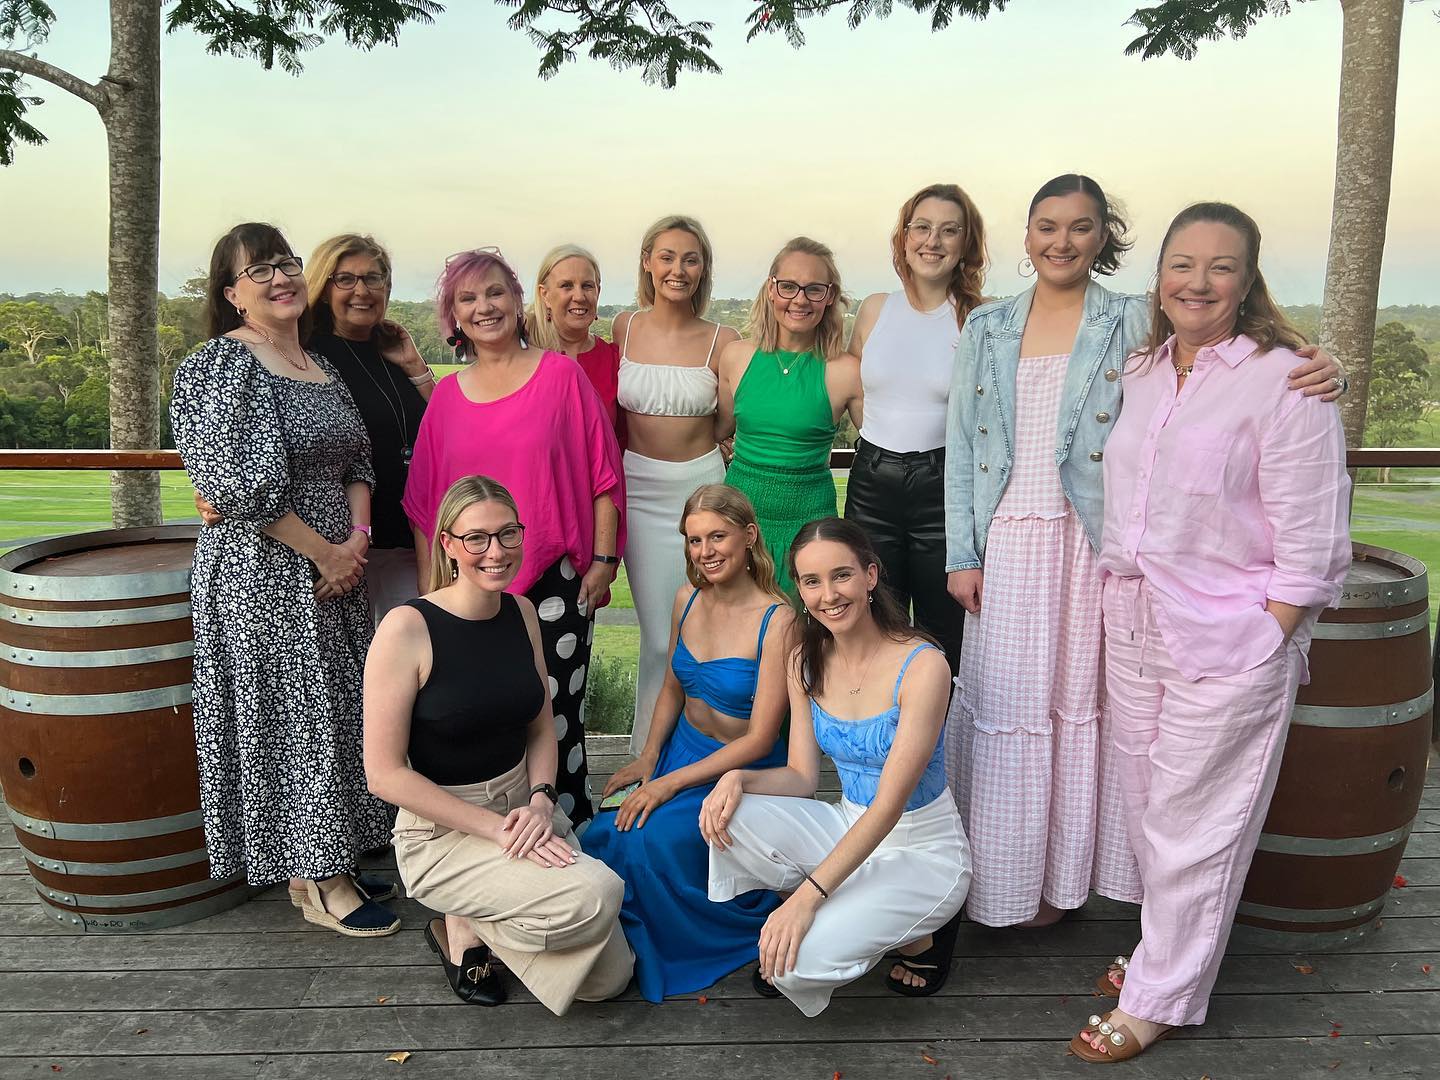 The team behind all the magic at EUDC ✨

What a wonderful evening spent with the EUDC staff and teachers celebrating and reminiscing on such a wonderful year! Each of these people are a pivotal part of our dream team and it is because of all of your hard work and determination that we had yet another incredible year 💗💜